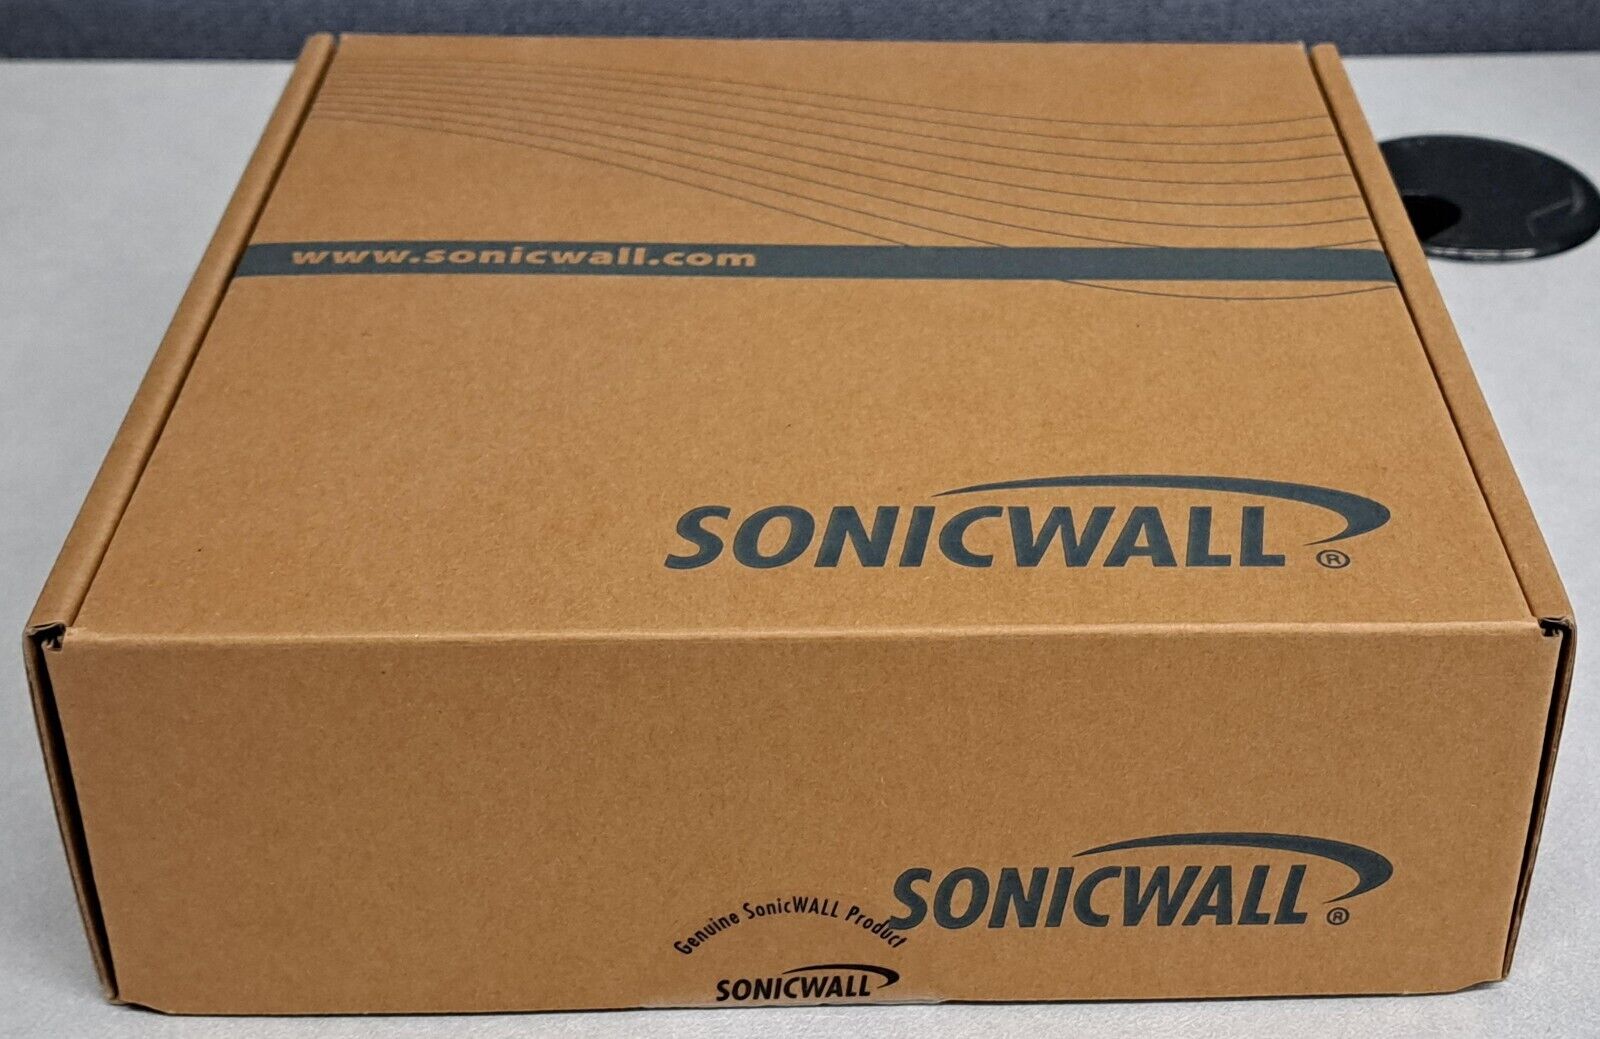 SonicWall Sonic Point-NI AP #: 01-SSC-8574